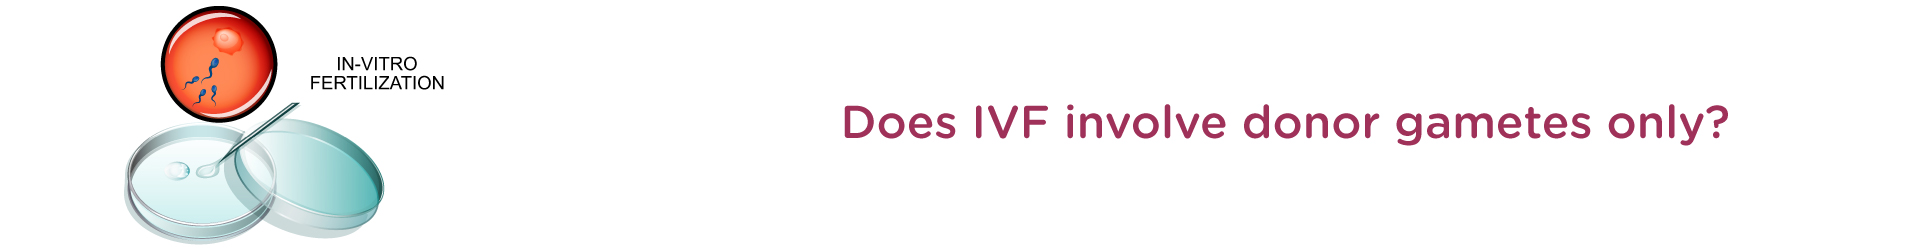 Does IVF involve donor gametes only?